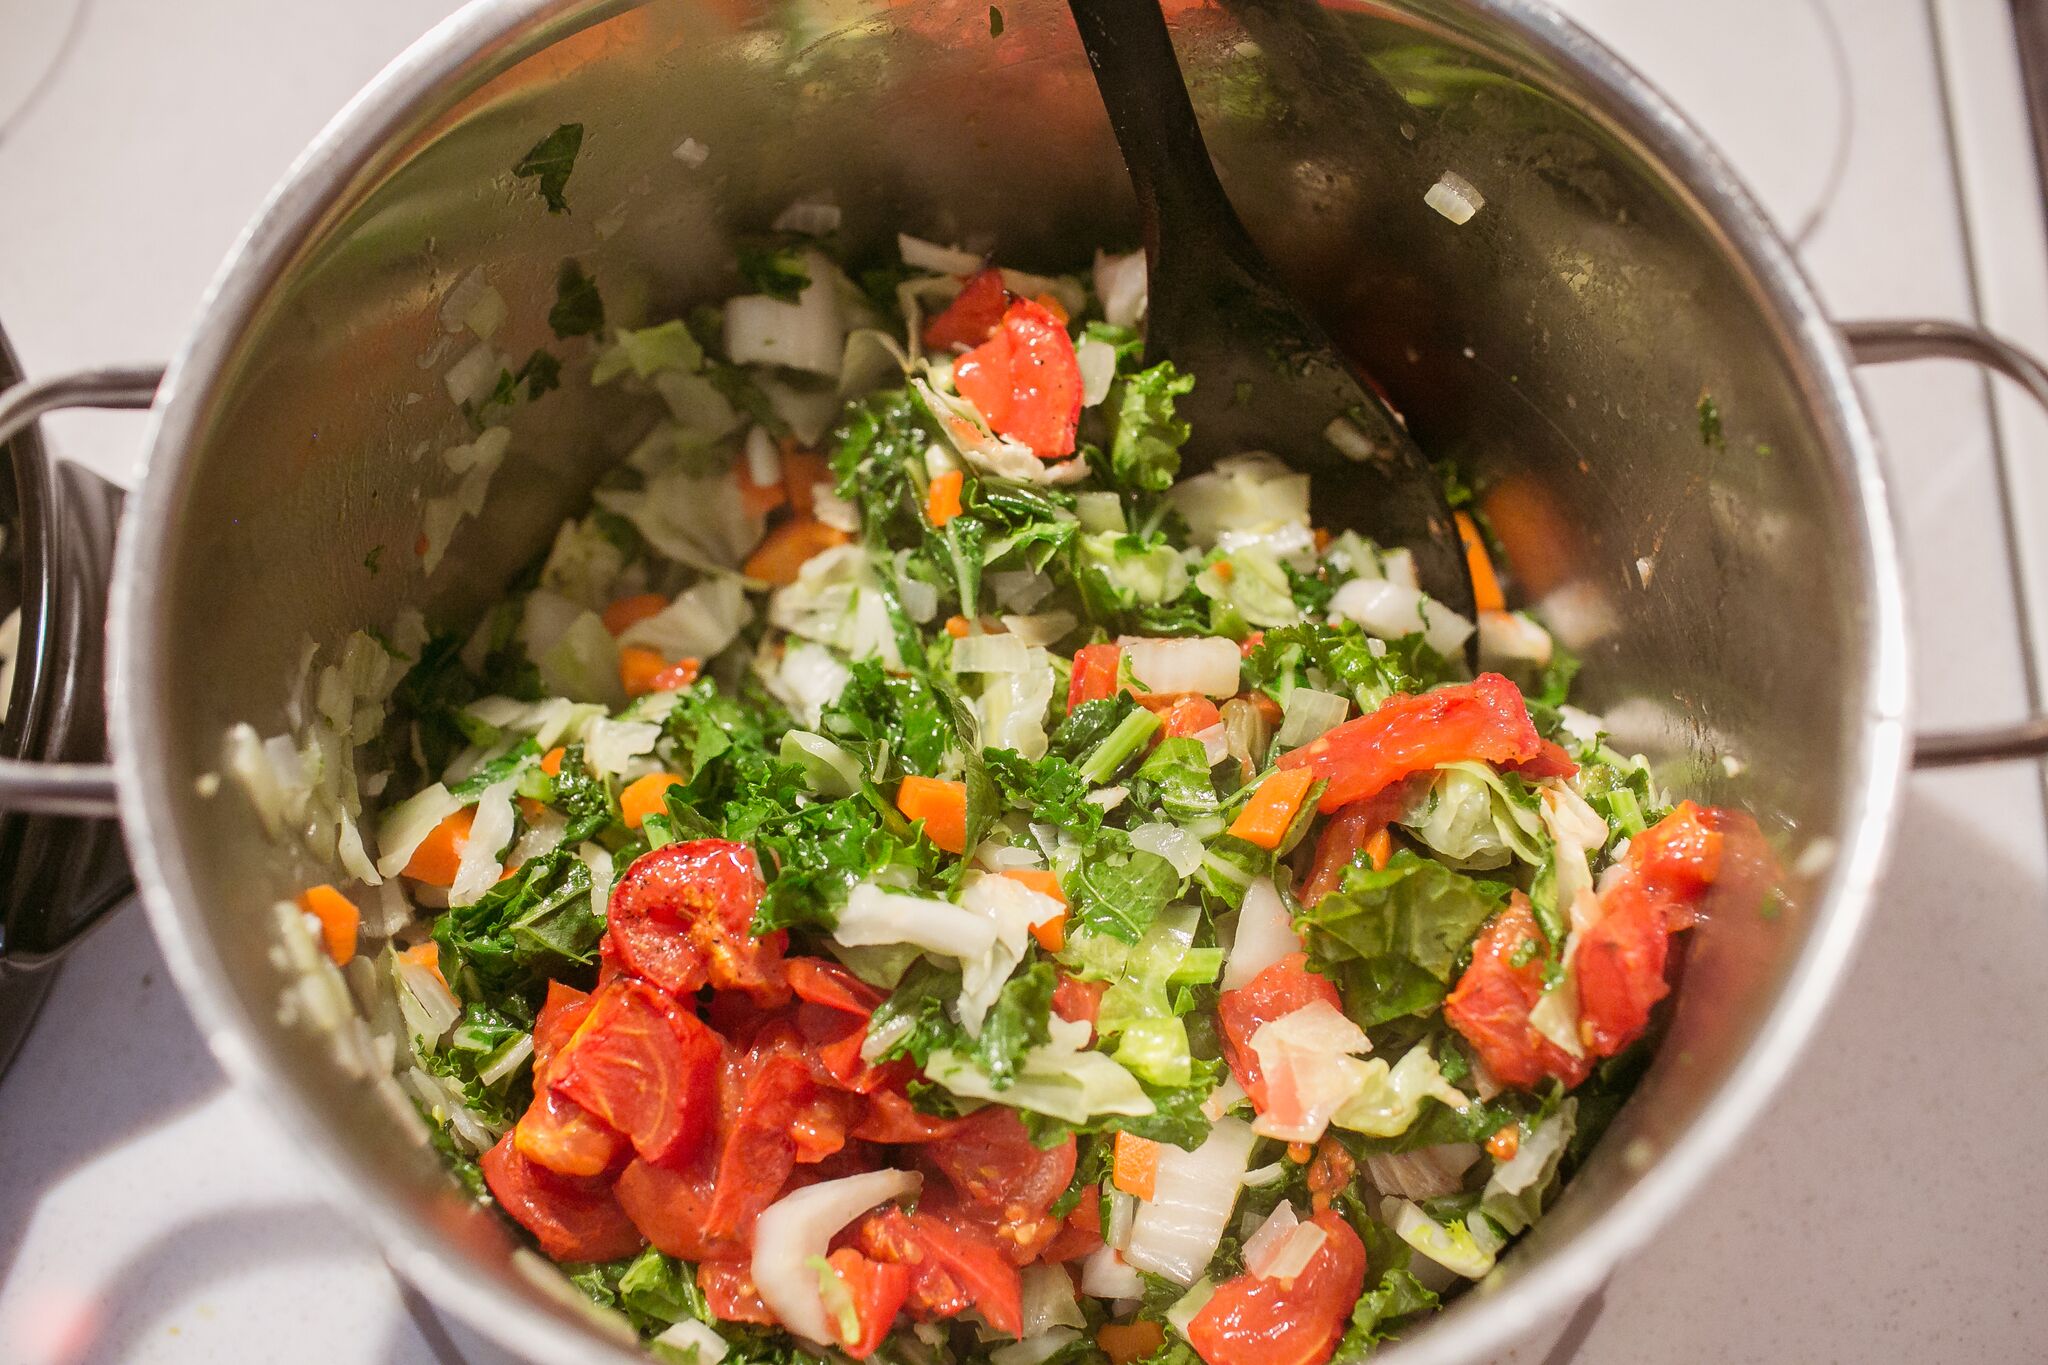 Add all other vegetables to the soup pot and mix ensuring all ingredients are coated with olive oil.